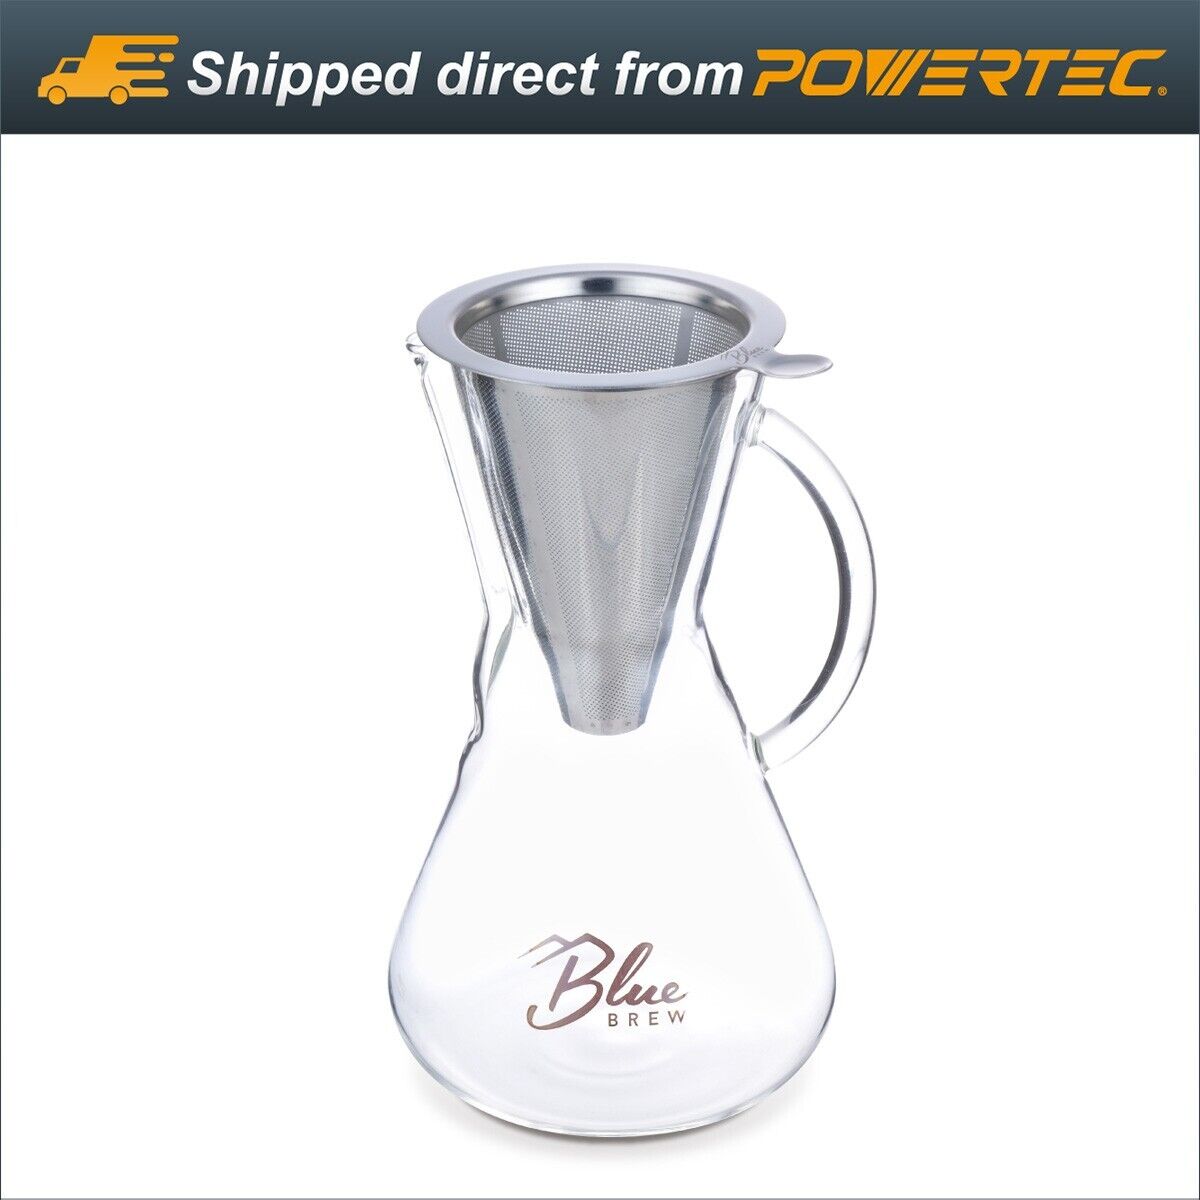 BLUE BREW BB1011 Pour Over Brewer | Coffee Maker Carafe w/ Permanent Filter